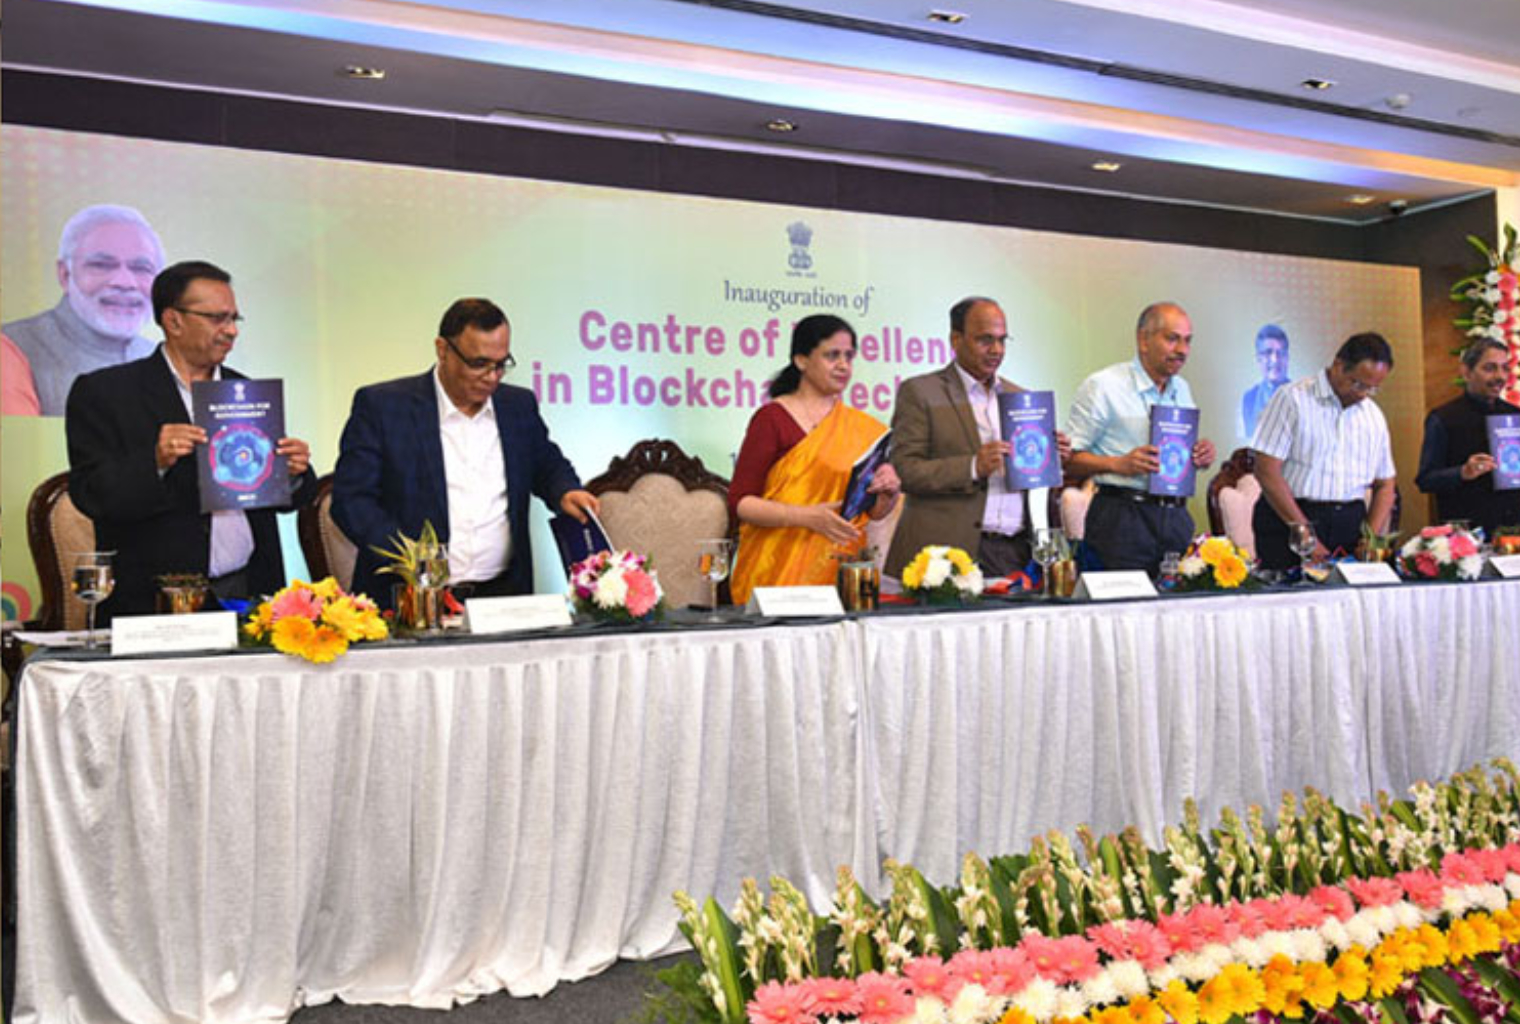 Indian Minister Augurates Blockchain Center of Excellence in Bengaluru